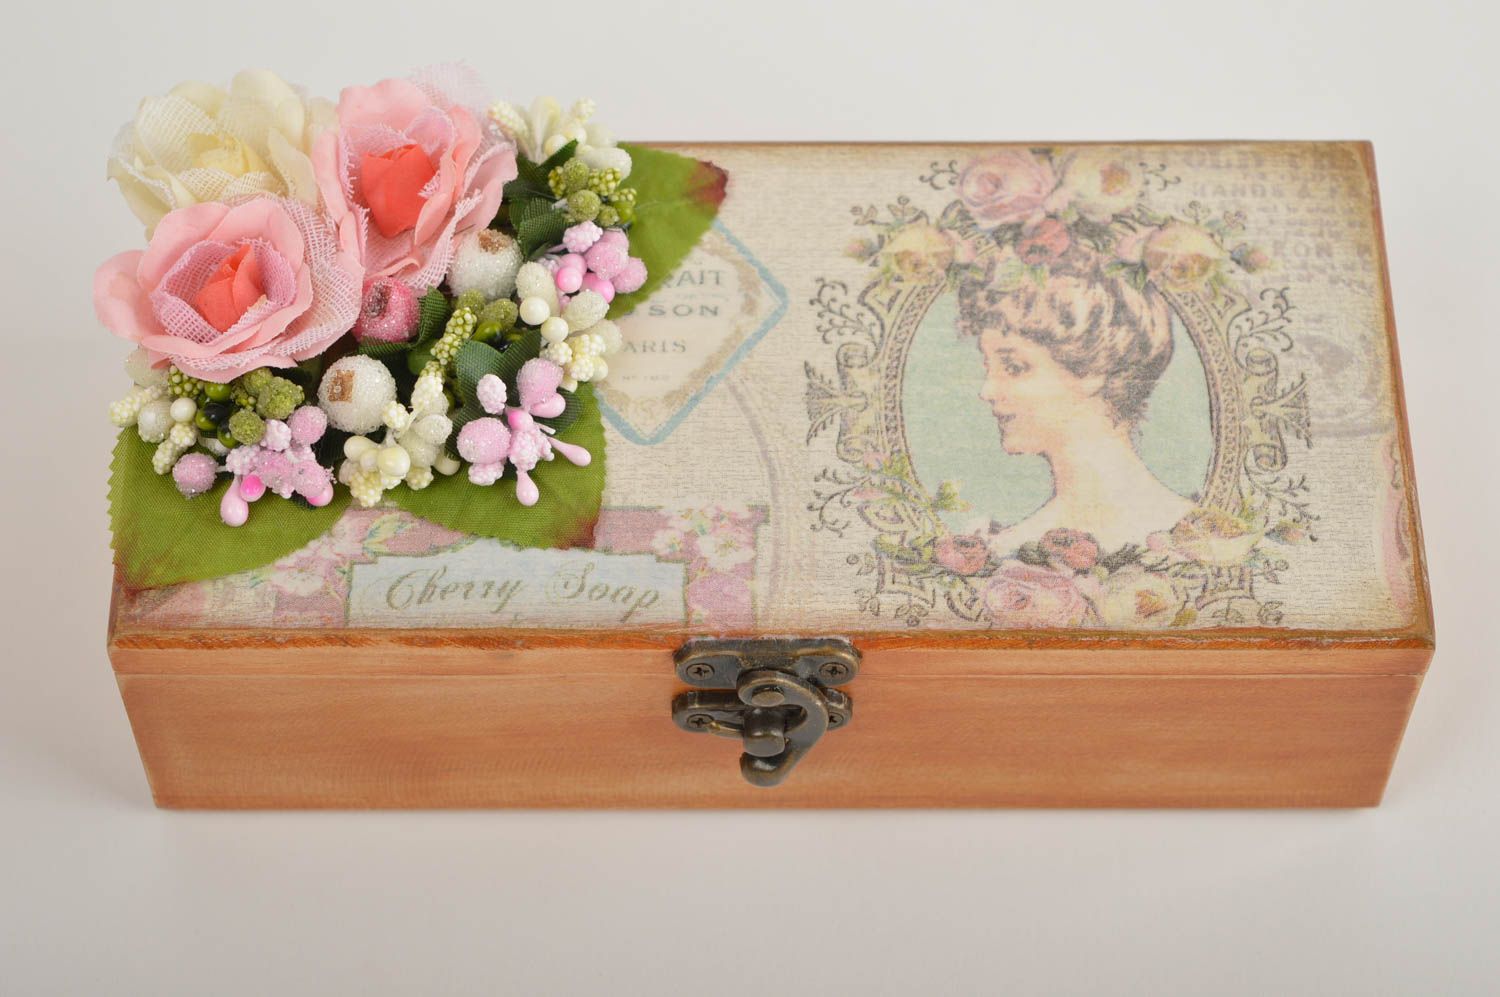 Handmade wooden jewelry box jewelry gift box vintage jewelry box gifts for her photo 4